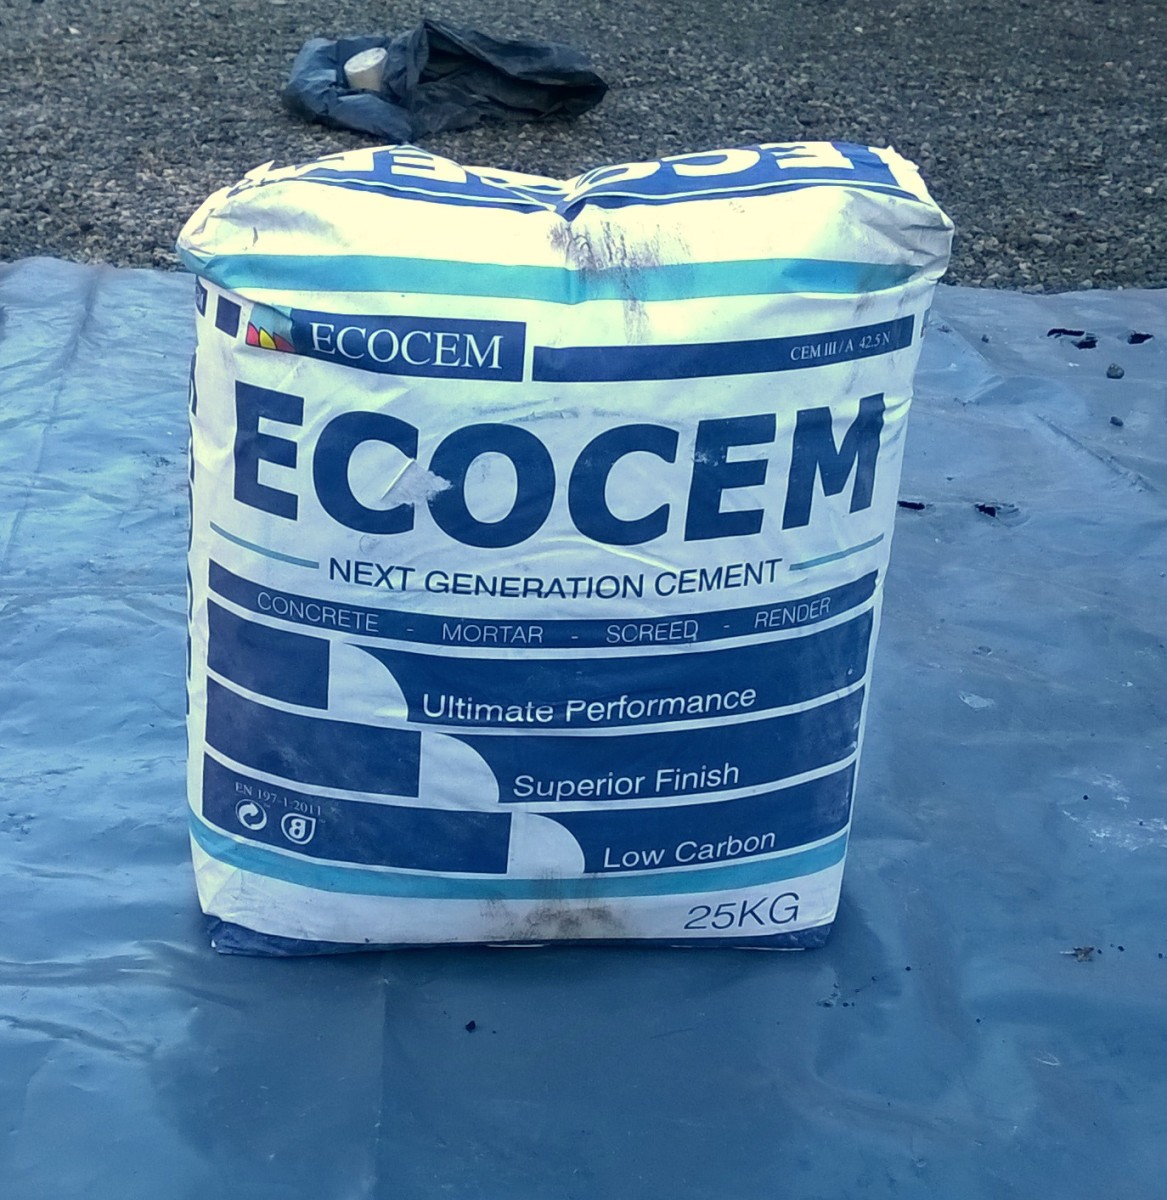 Cement is available in 25kg bags.